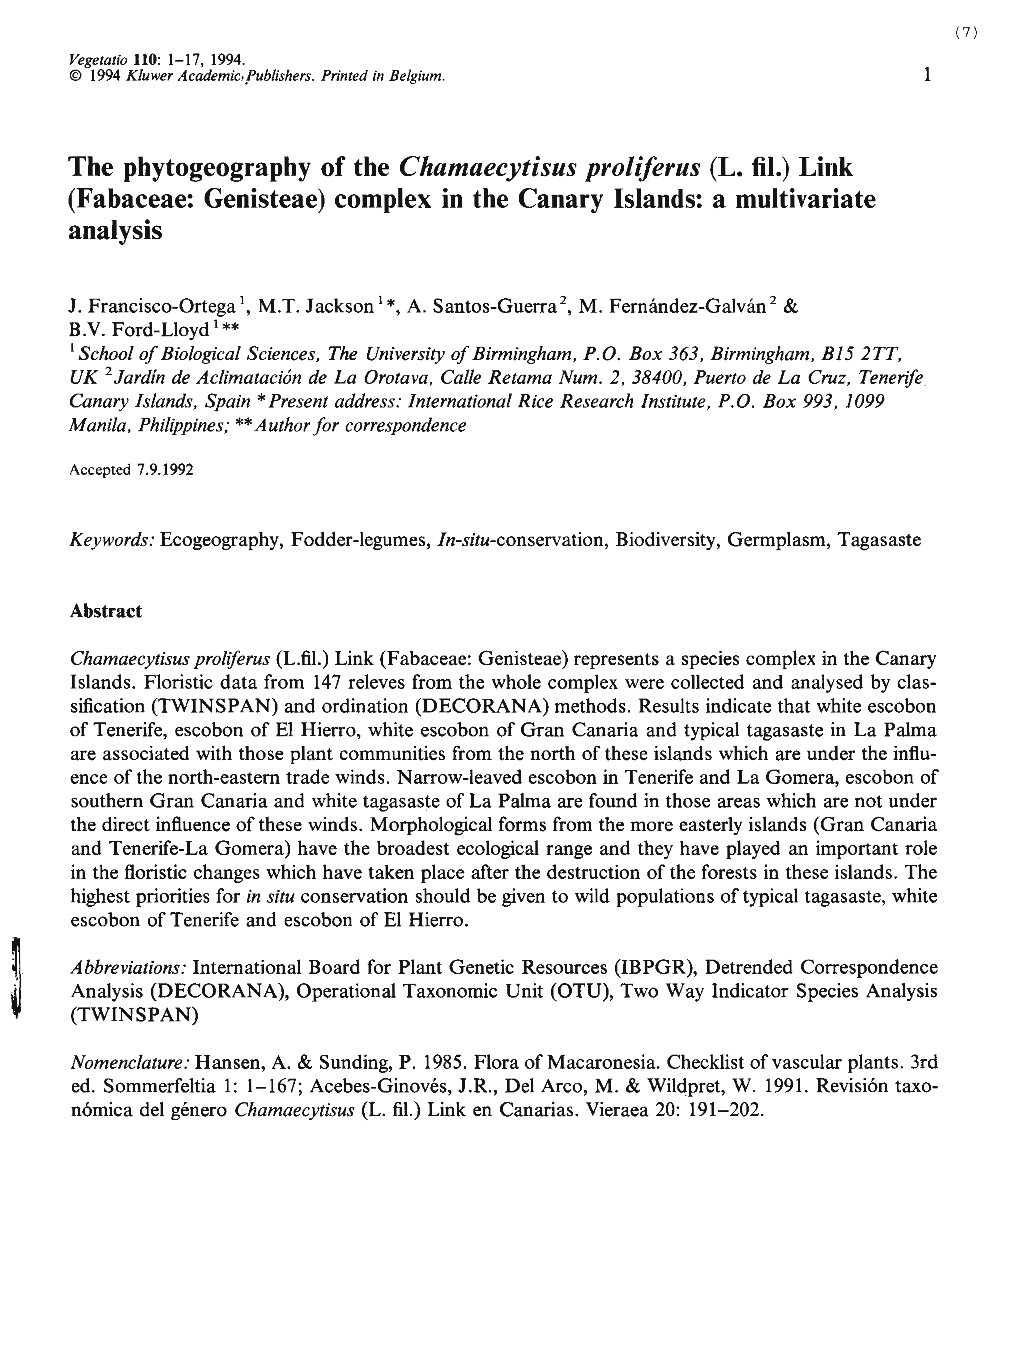 The Phytogeography of the Chamaecytisus Proliferus (L. Fil.) Link (Fabaceae: Genisteae) Complex in the Canary Islands: a Multivariate Analysis